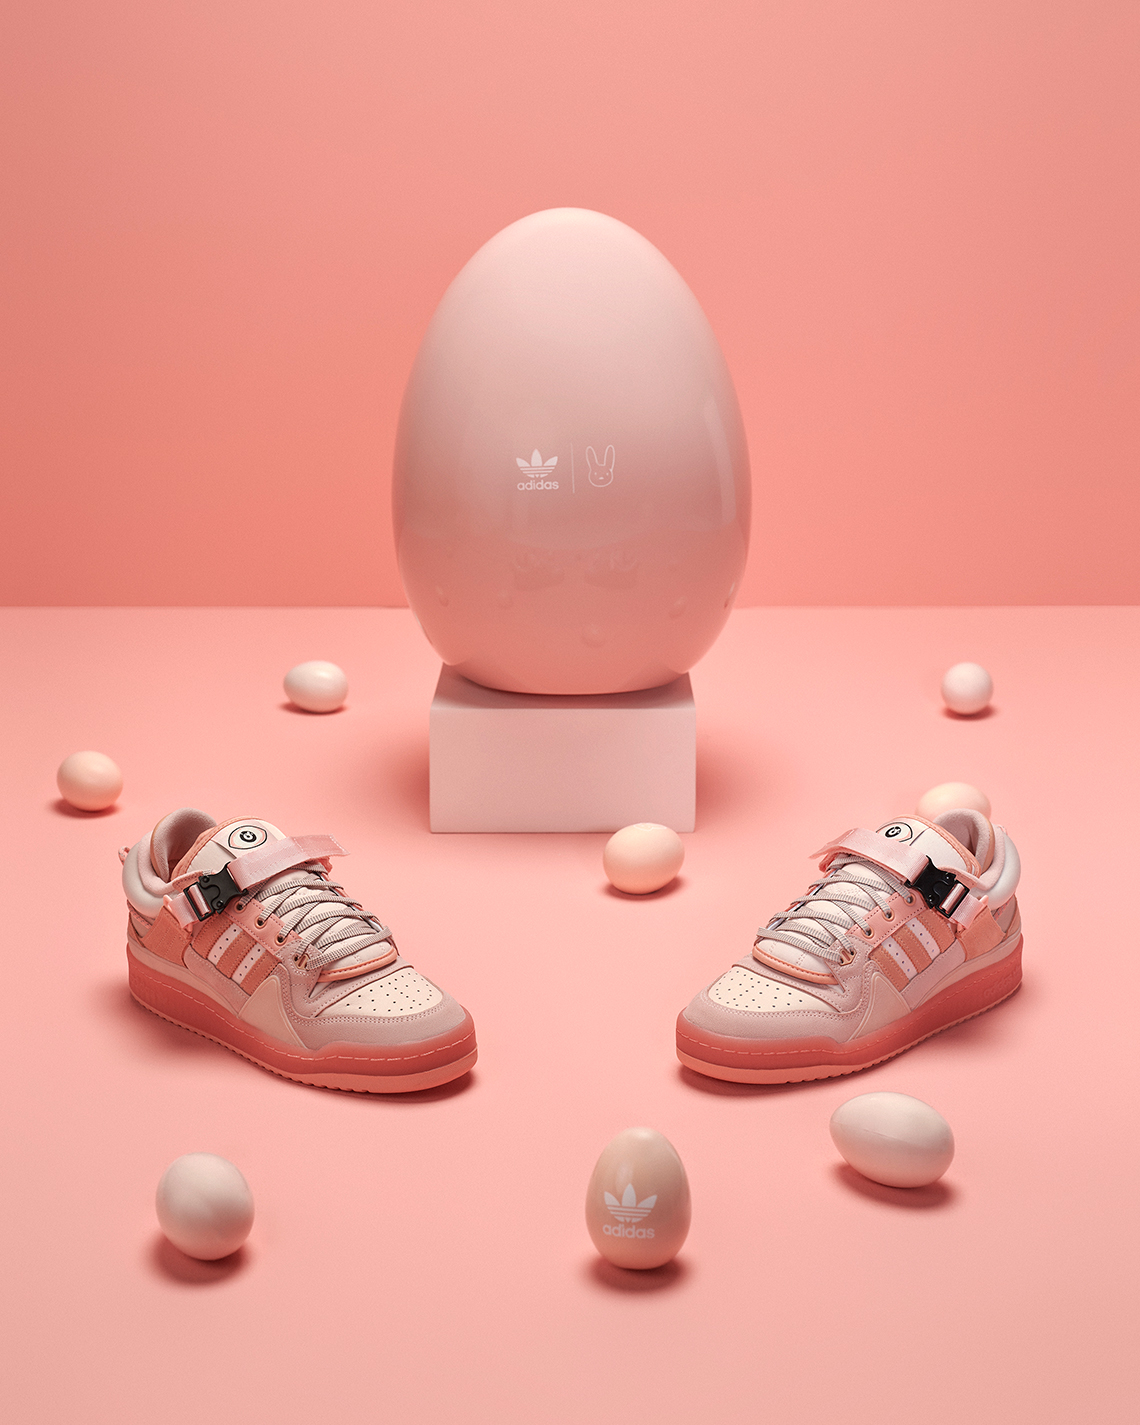 bad-bunny-adidas-pink-shoes-release-date-5.jpg